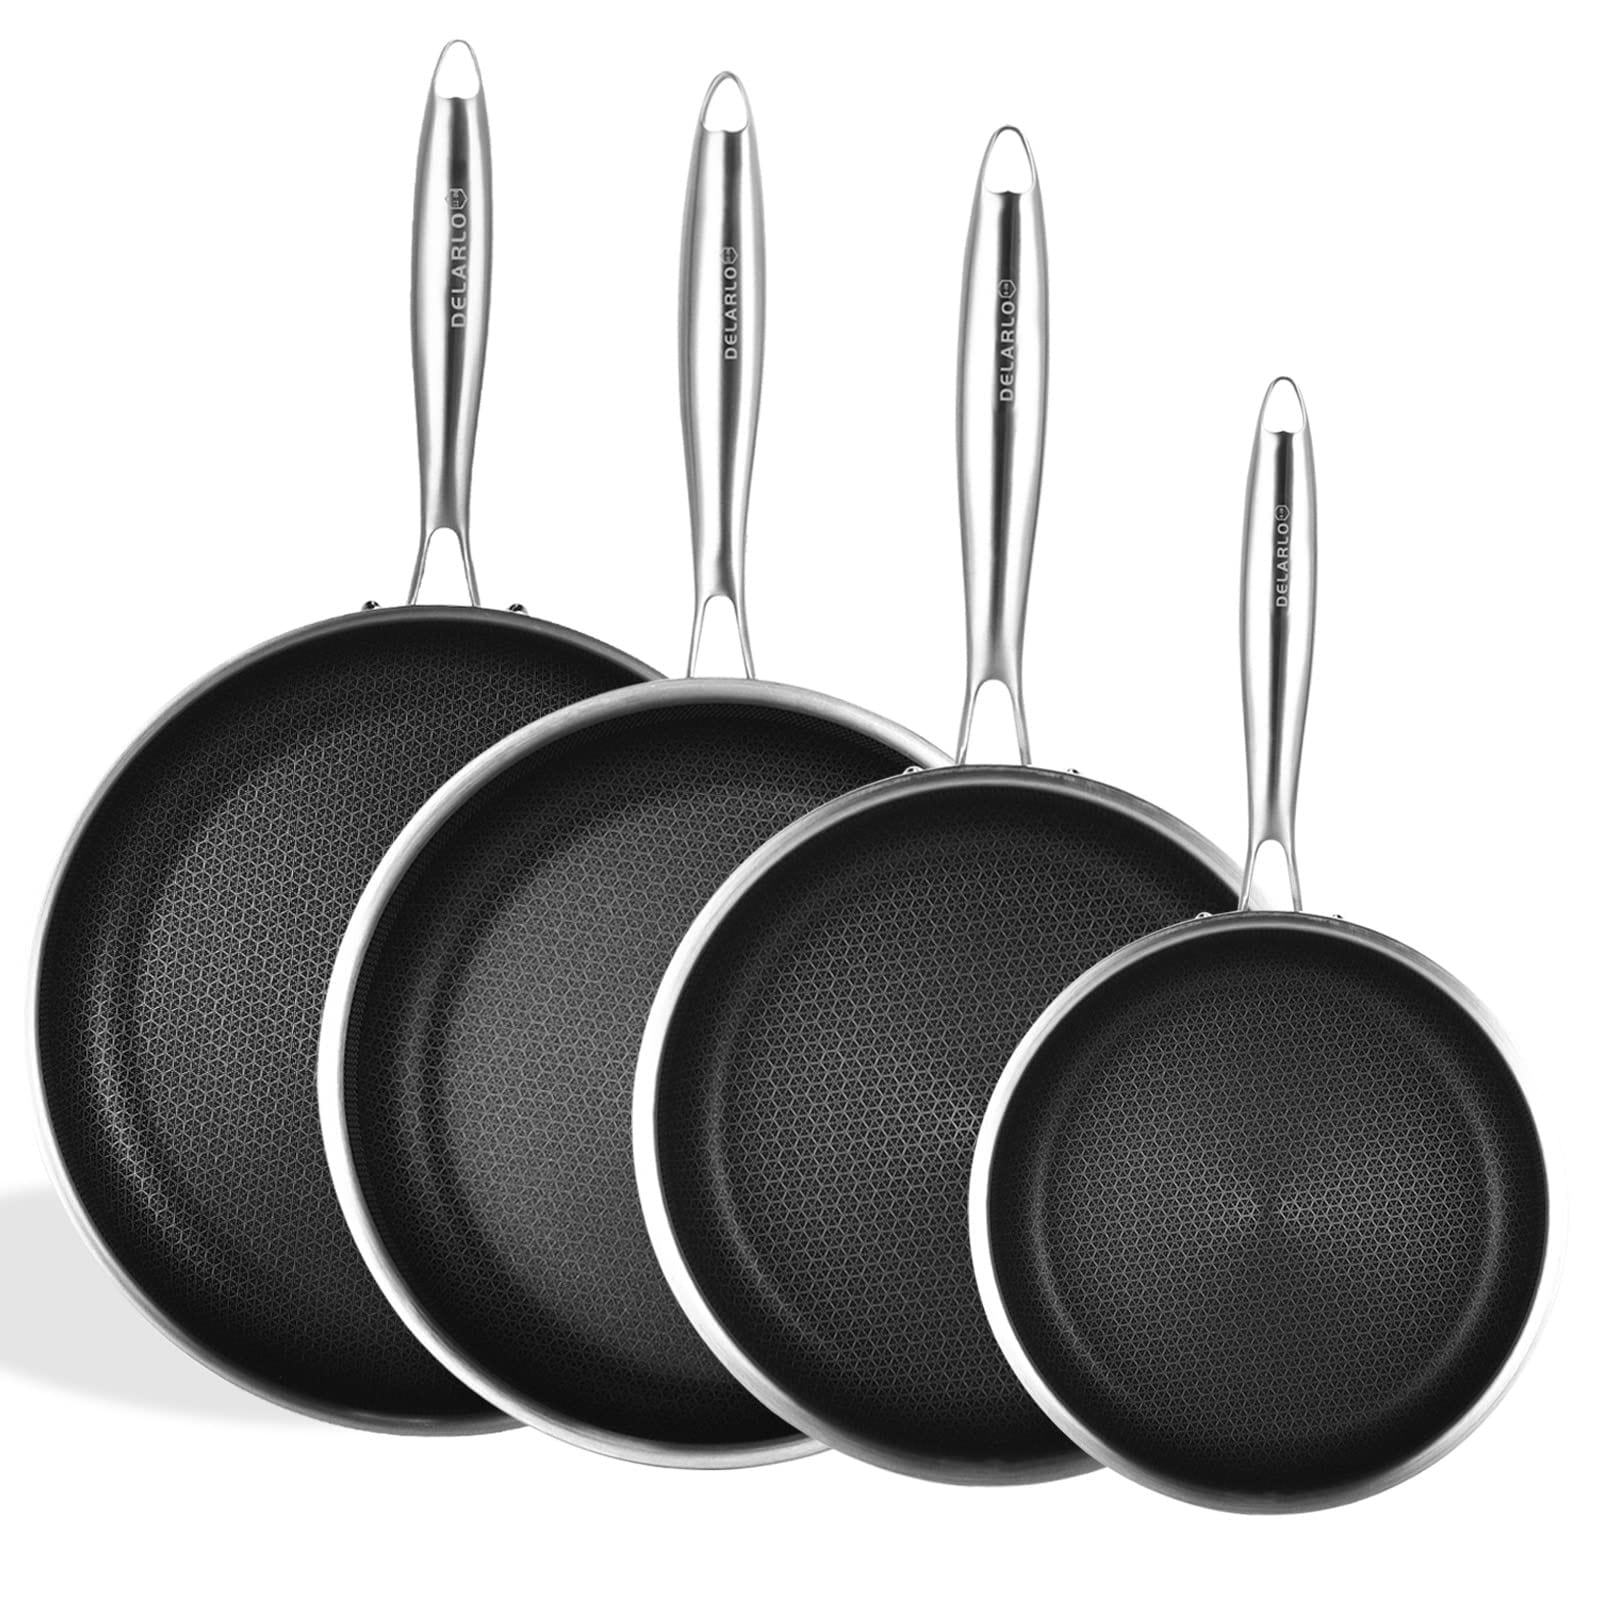 Stainless Steel Frying Pan Set Cooking Pan Skillets Oven Safe